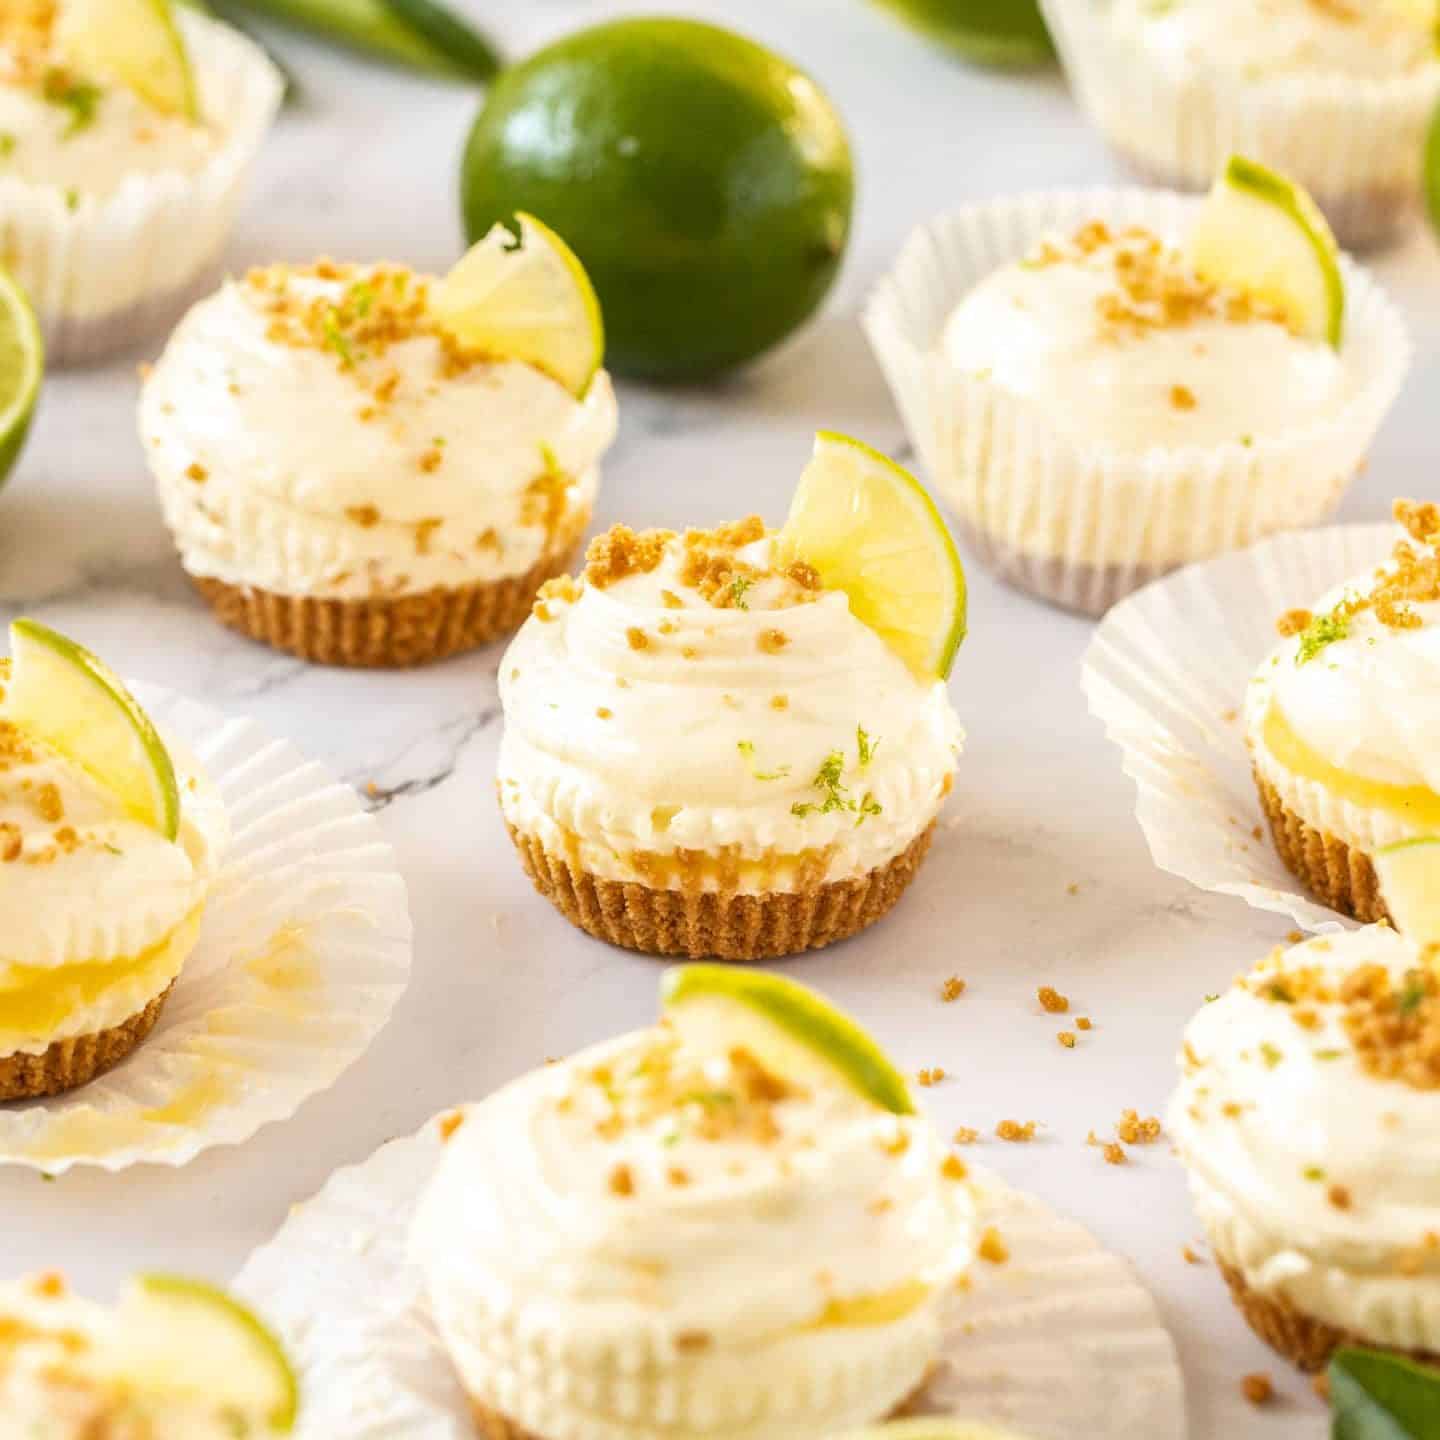 A batch of mini cheesecakes surrounded by limes and cookie crumbs